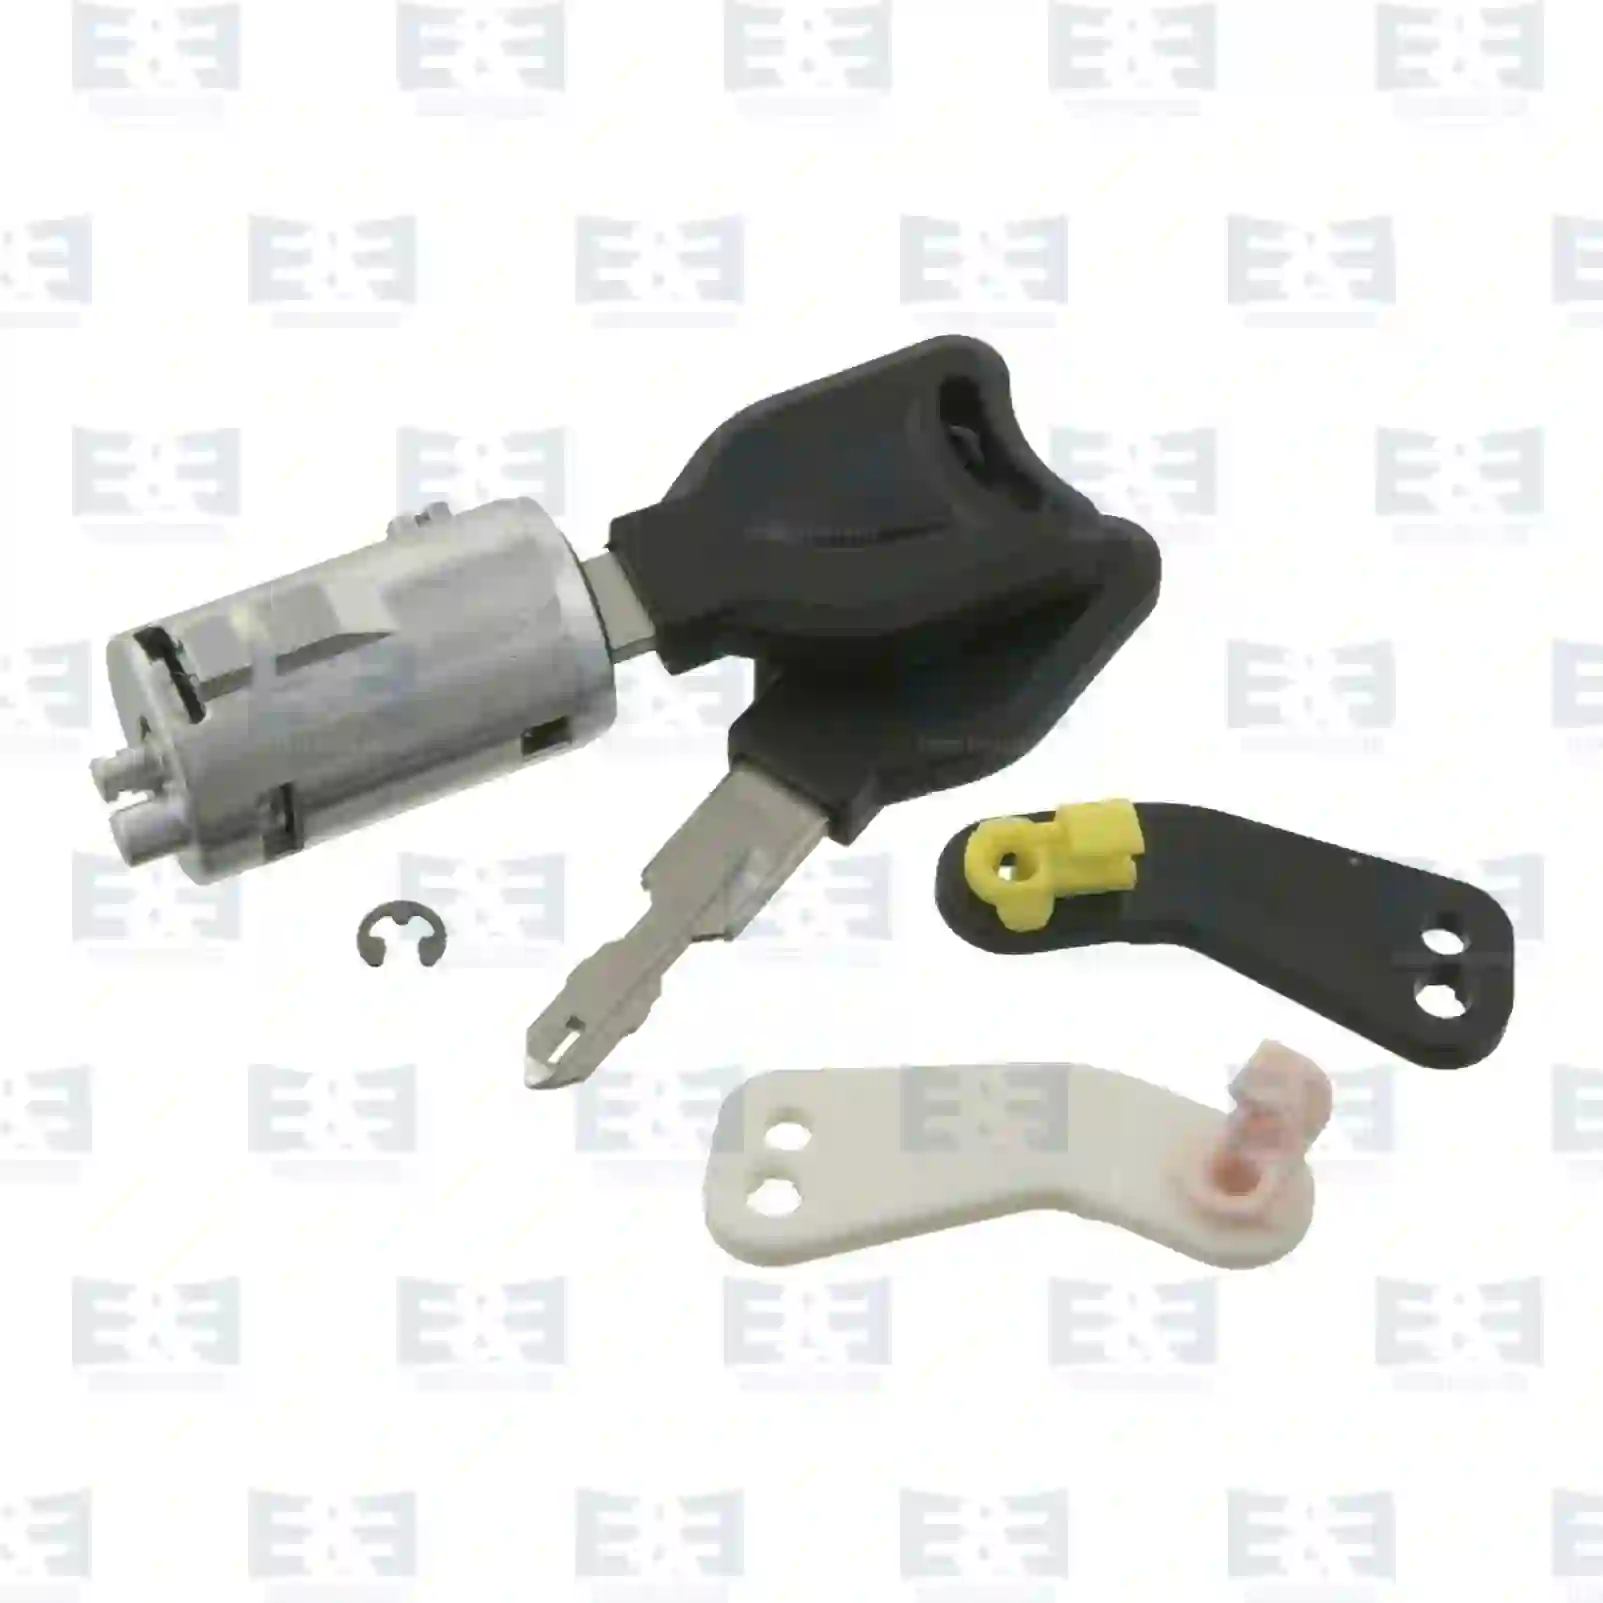  Lock cylinder kit || E&E Truck Spare Parts | Truck Spare Parts, Auotomotive Spare Parts